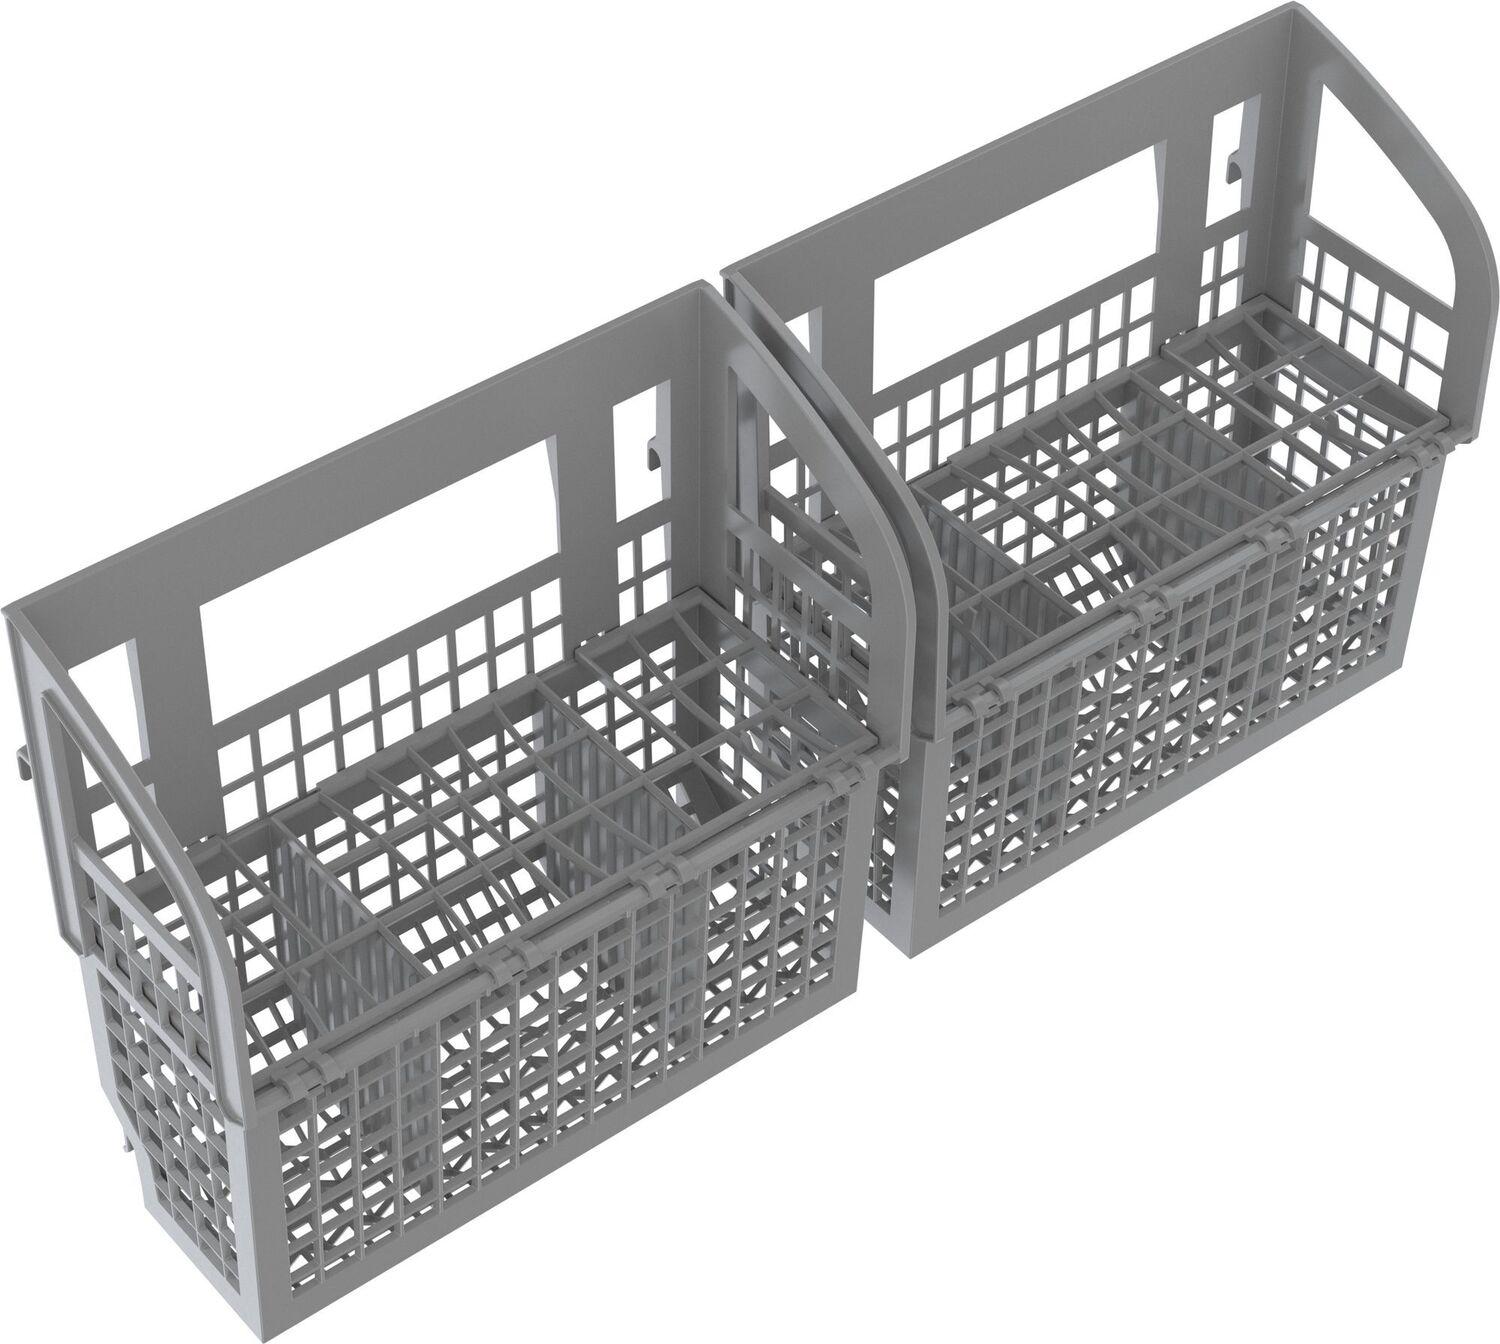 Bosch 100 Series Dishwasher 24" Stainless steel SHE3AEE5N